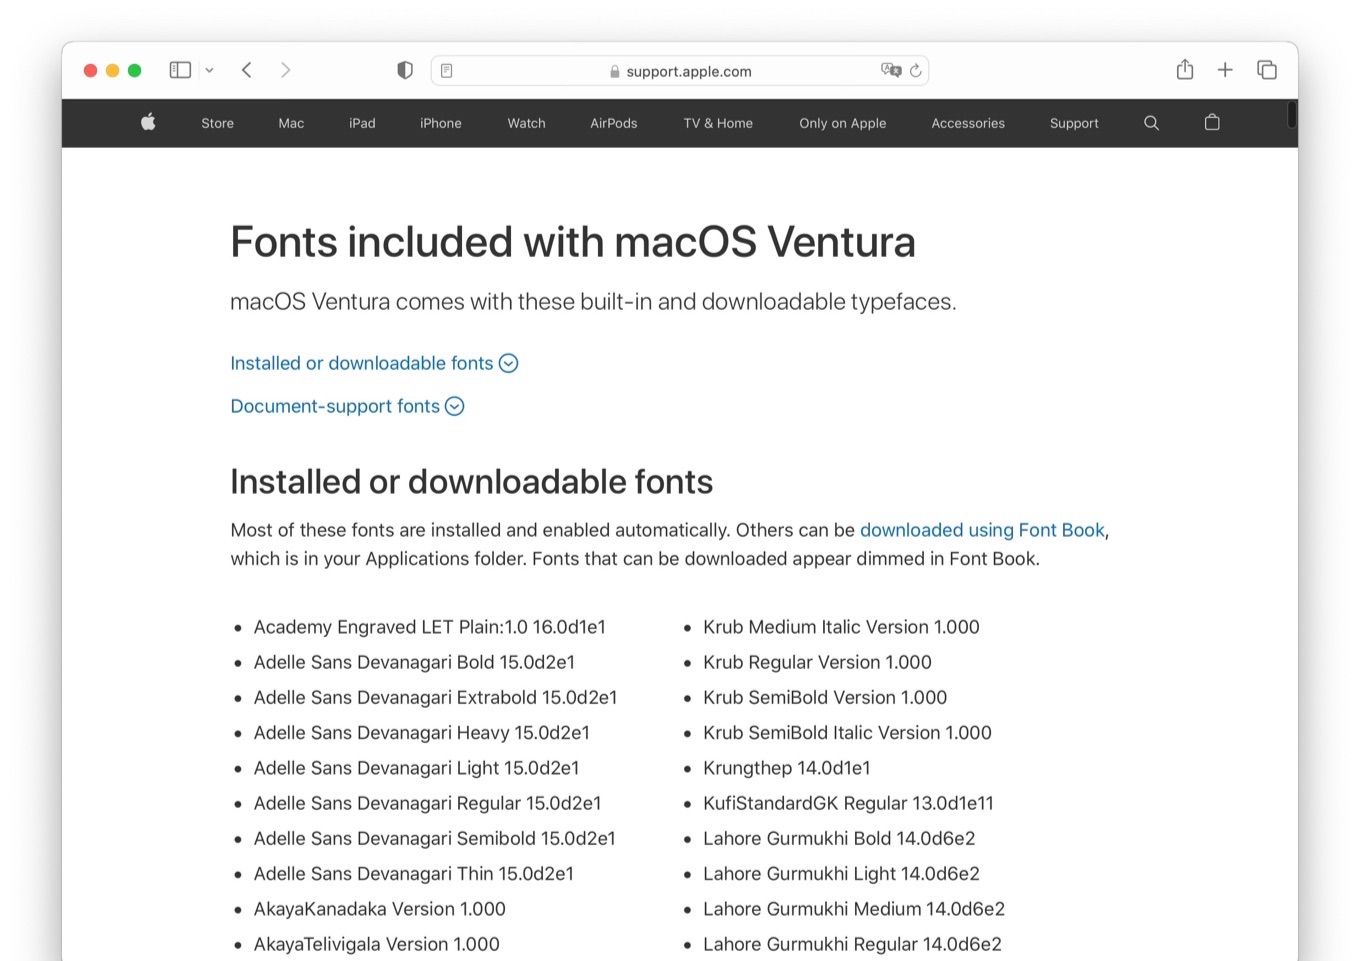 Fonts included with macOS Ventura